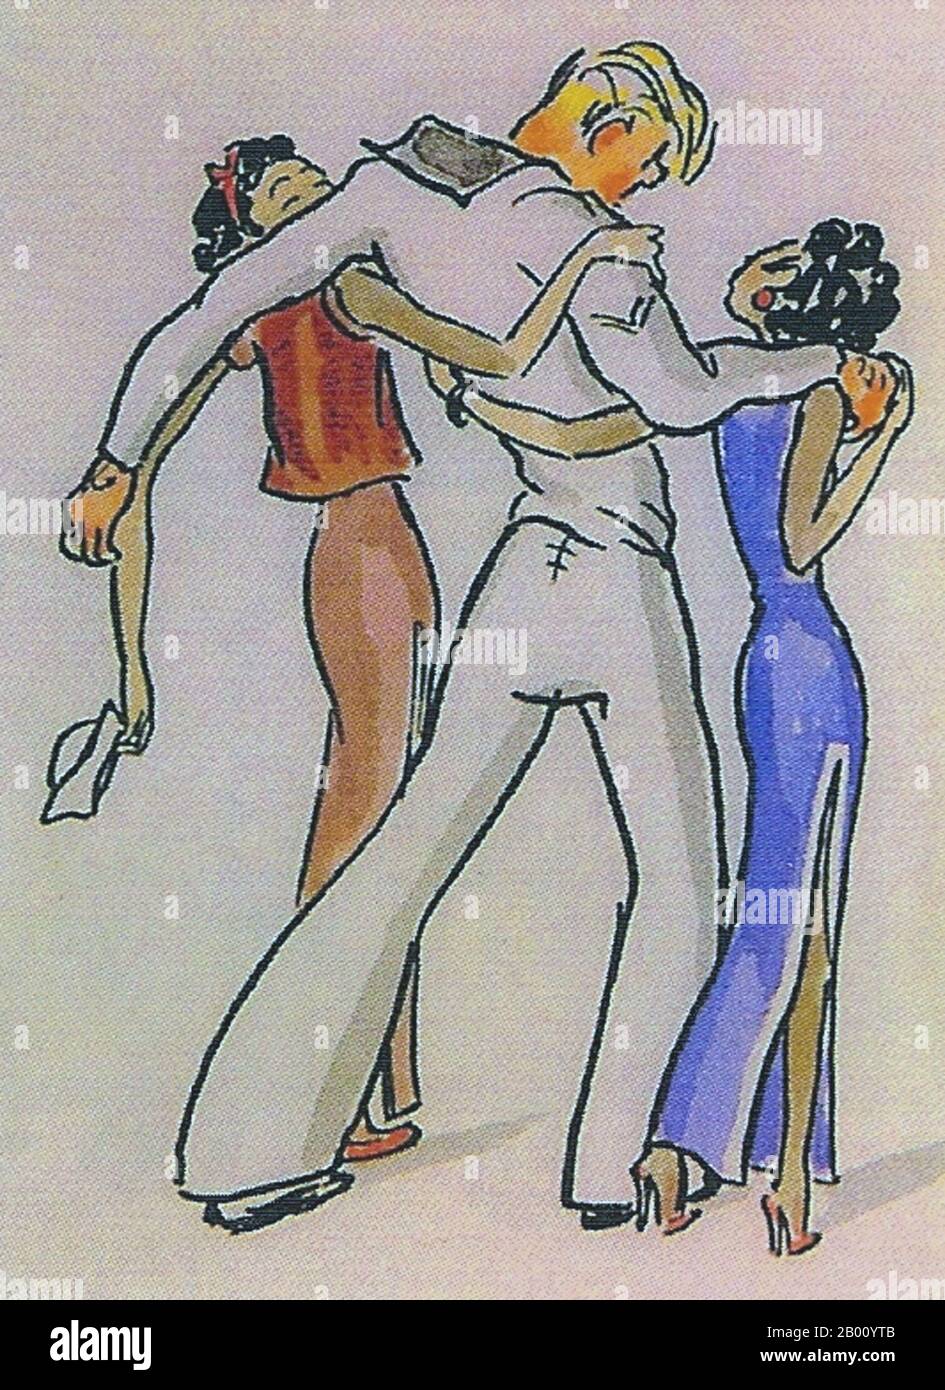 China: Two singsong girls in fashionable cheongsam dresses escort a drunken US sailor on liberty in 1930s Shanghai. Cartoon by Friedrich Schiff (1908-1968), 1930s.  Coloured drawing of Old Shanghai, vintage cartoon by Friedrich Schiff, an Austrian Jew who lived in Shanghai during the 1930s and 40s. In 1930 Schiff visited Shanghai and ended up living there for 14 years, until 1947 when he moved to Buenos Aires. Stock Photo